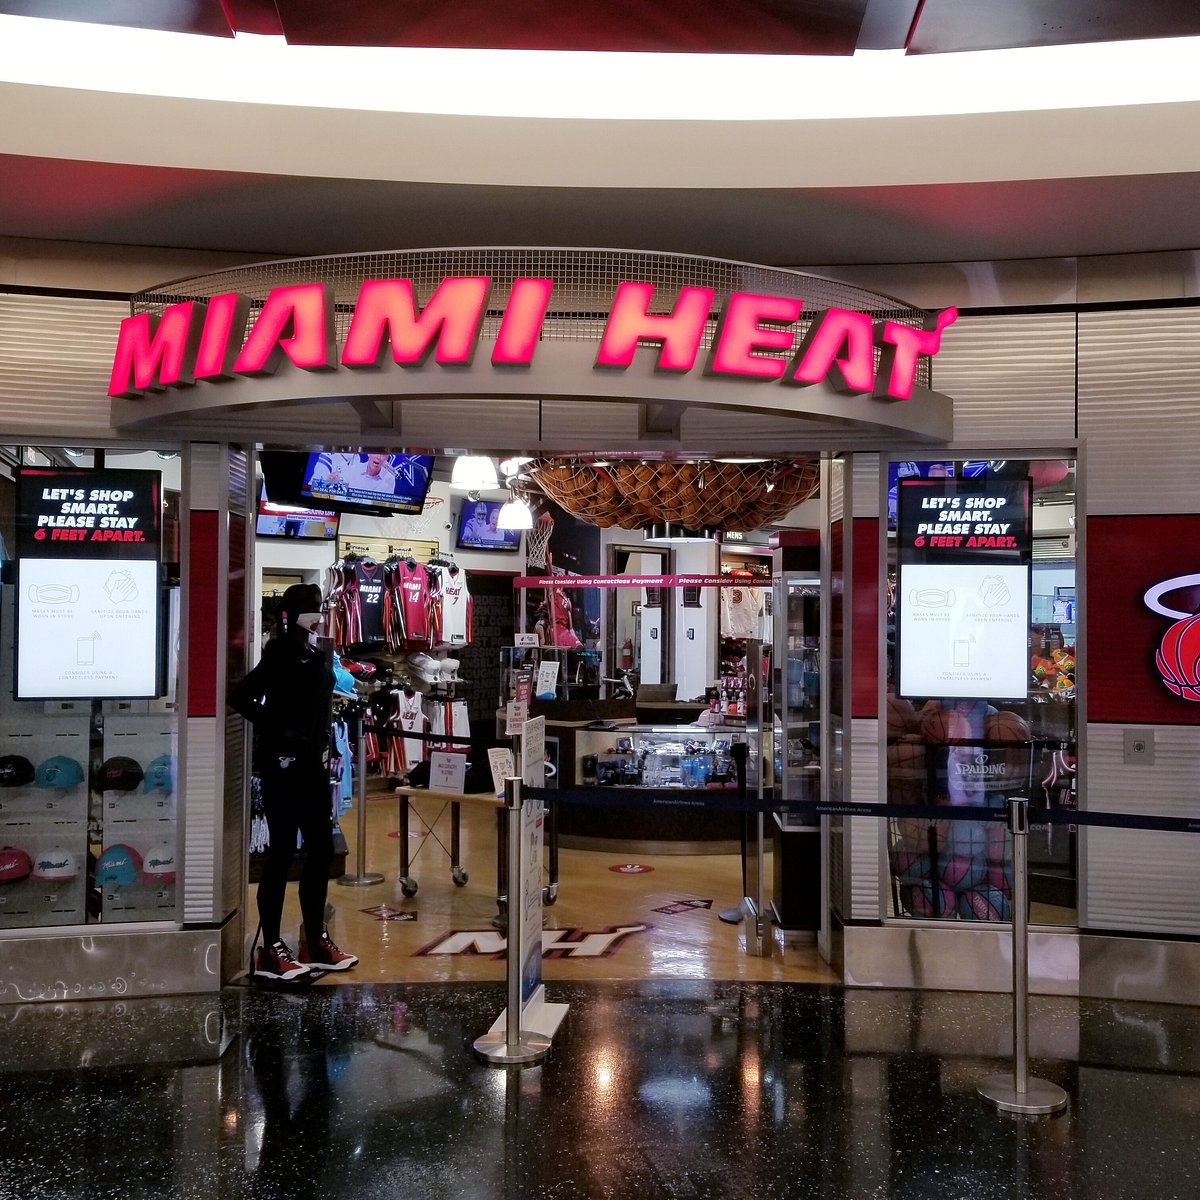 The Miami HEAT Store on X: Our Dolphin Mall and Pembroke Lakes